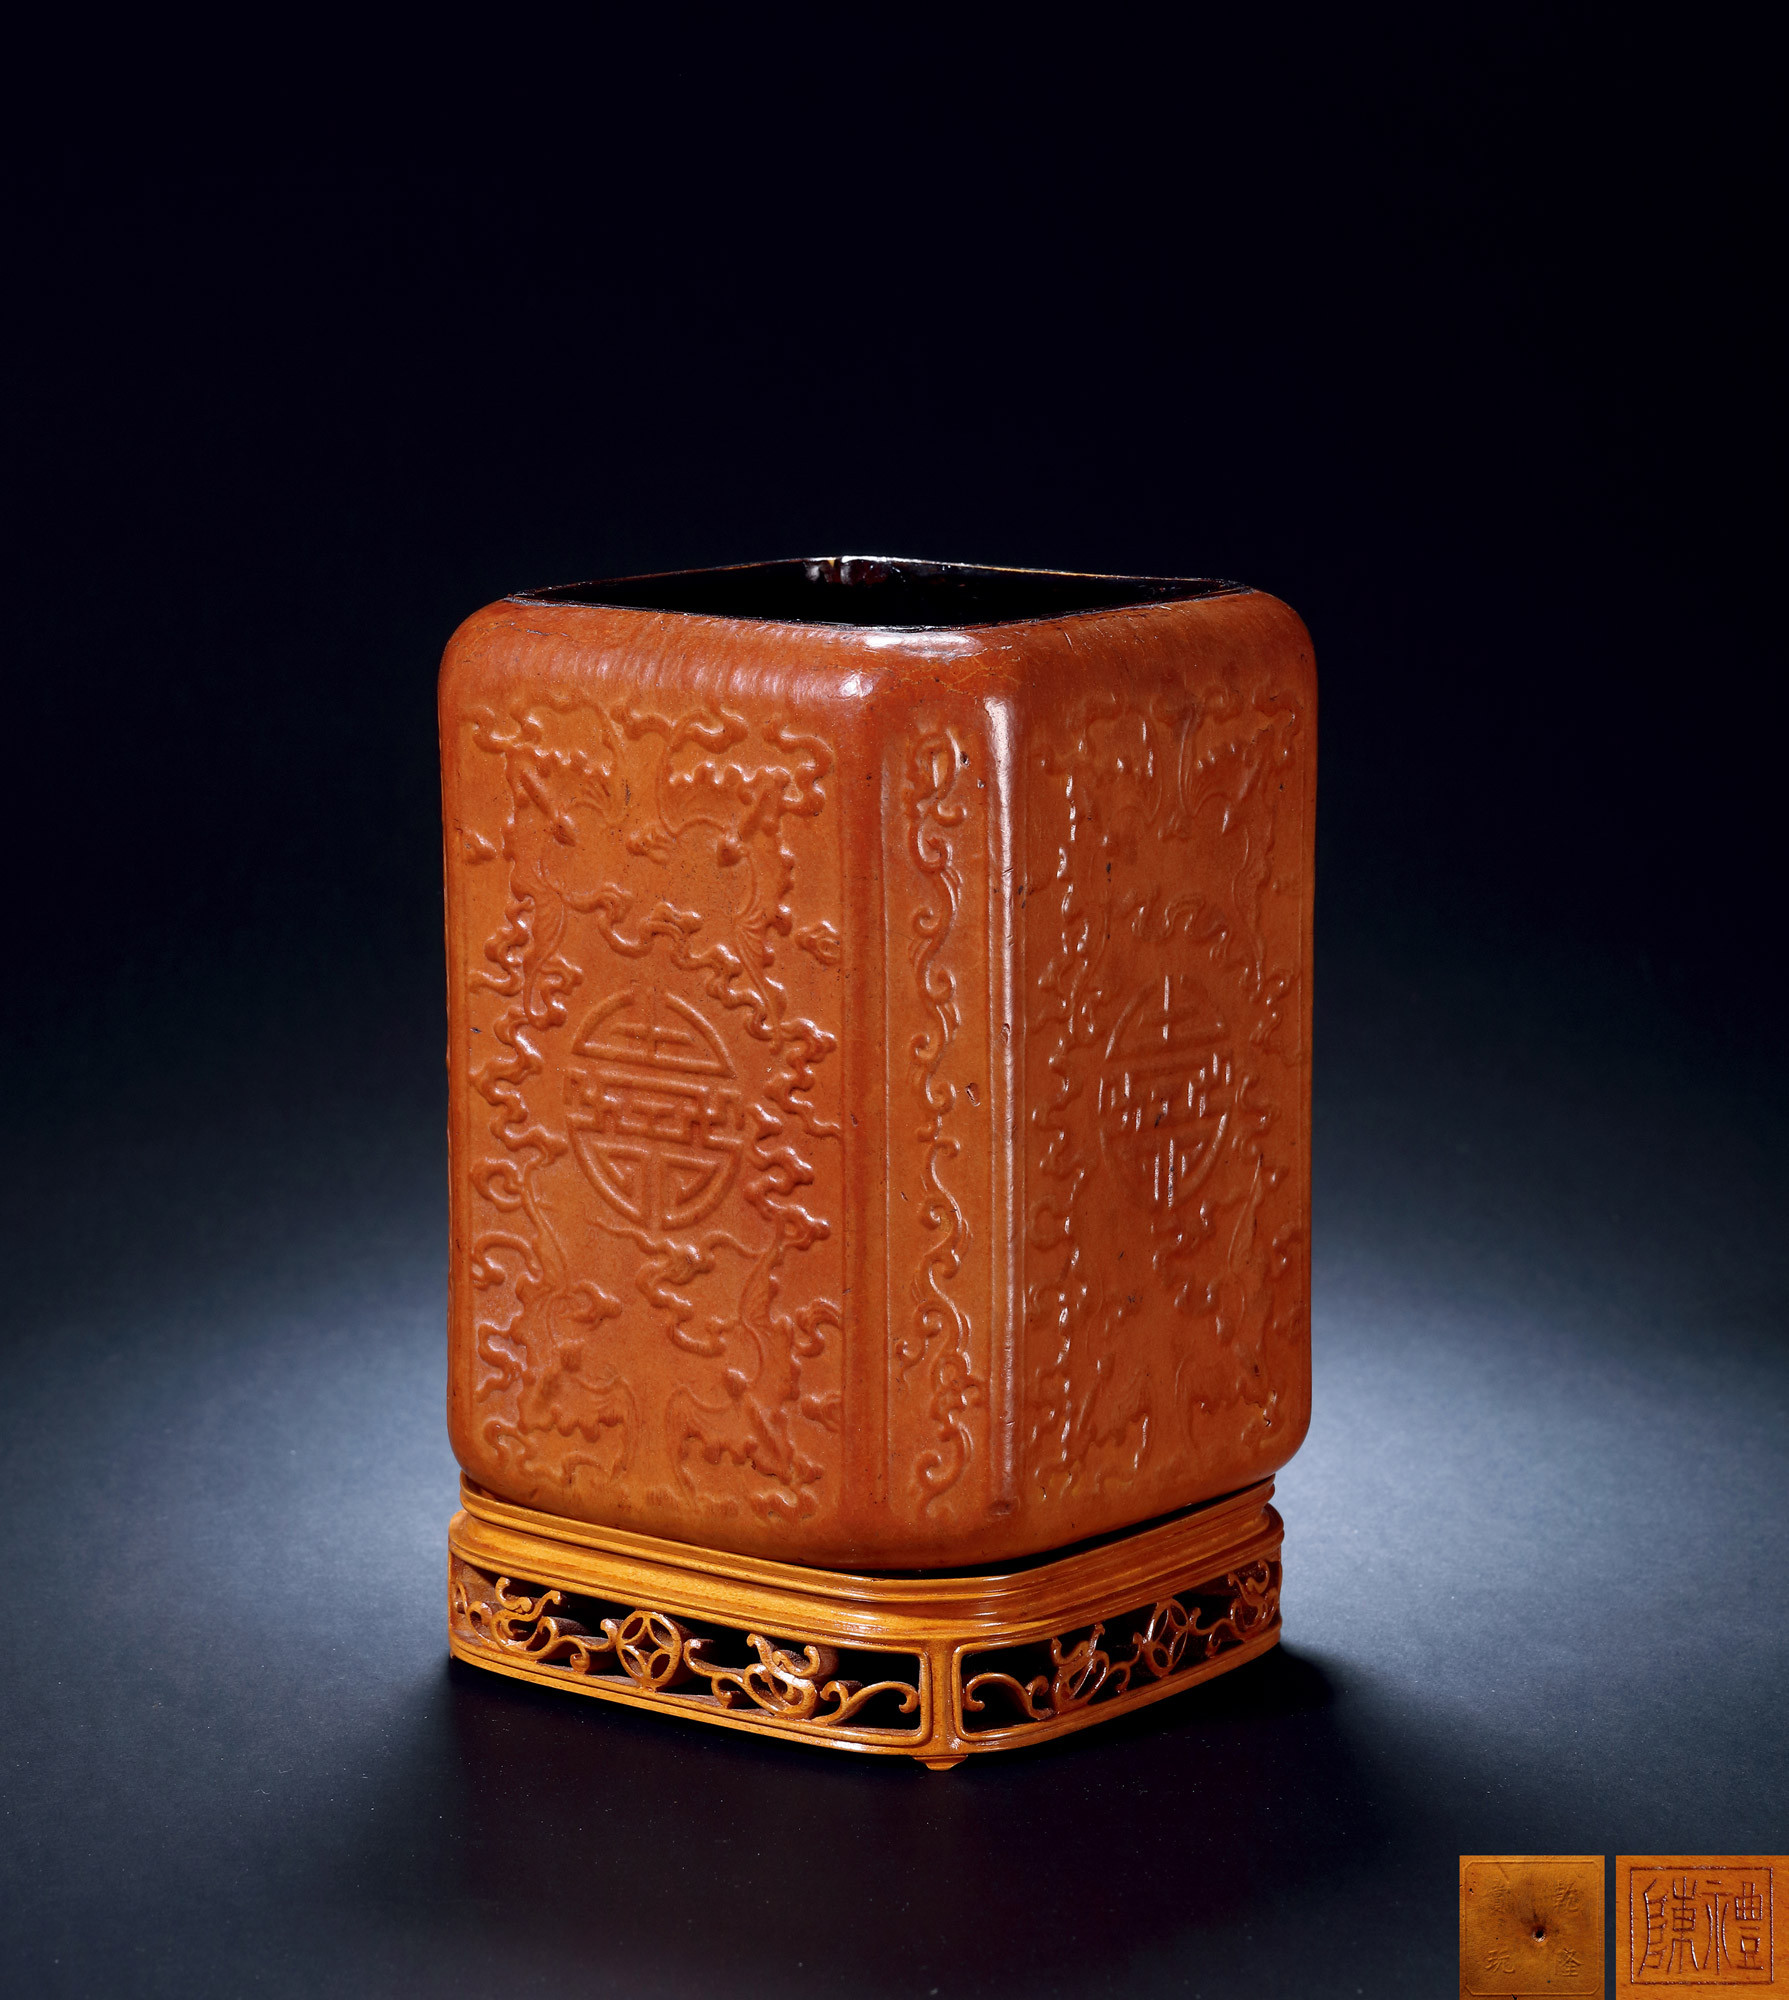 A VERY RARE AND FINELY HULU MOULDED‘HAPPINESS AND LONGEVITY’BRUSH POT